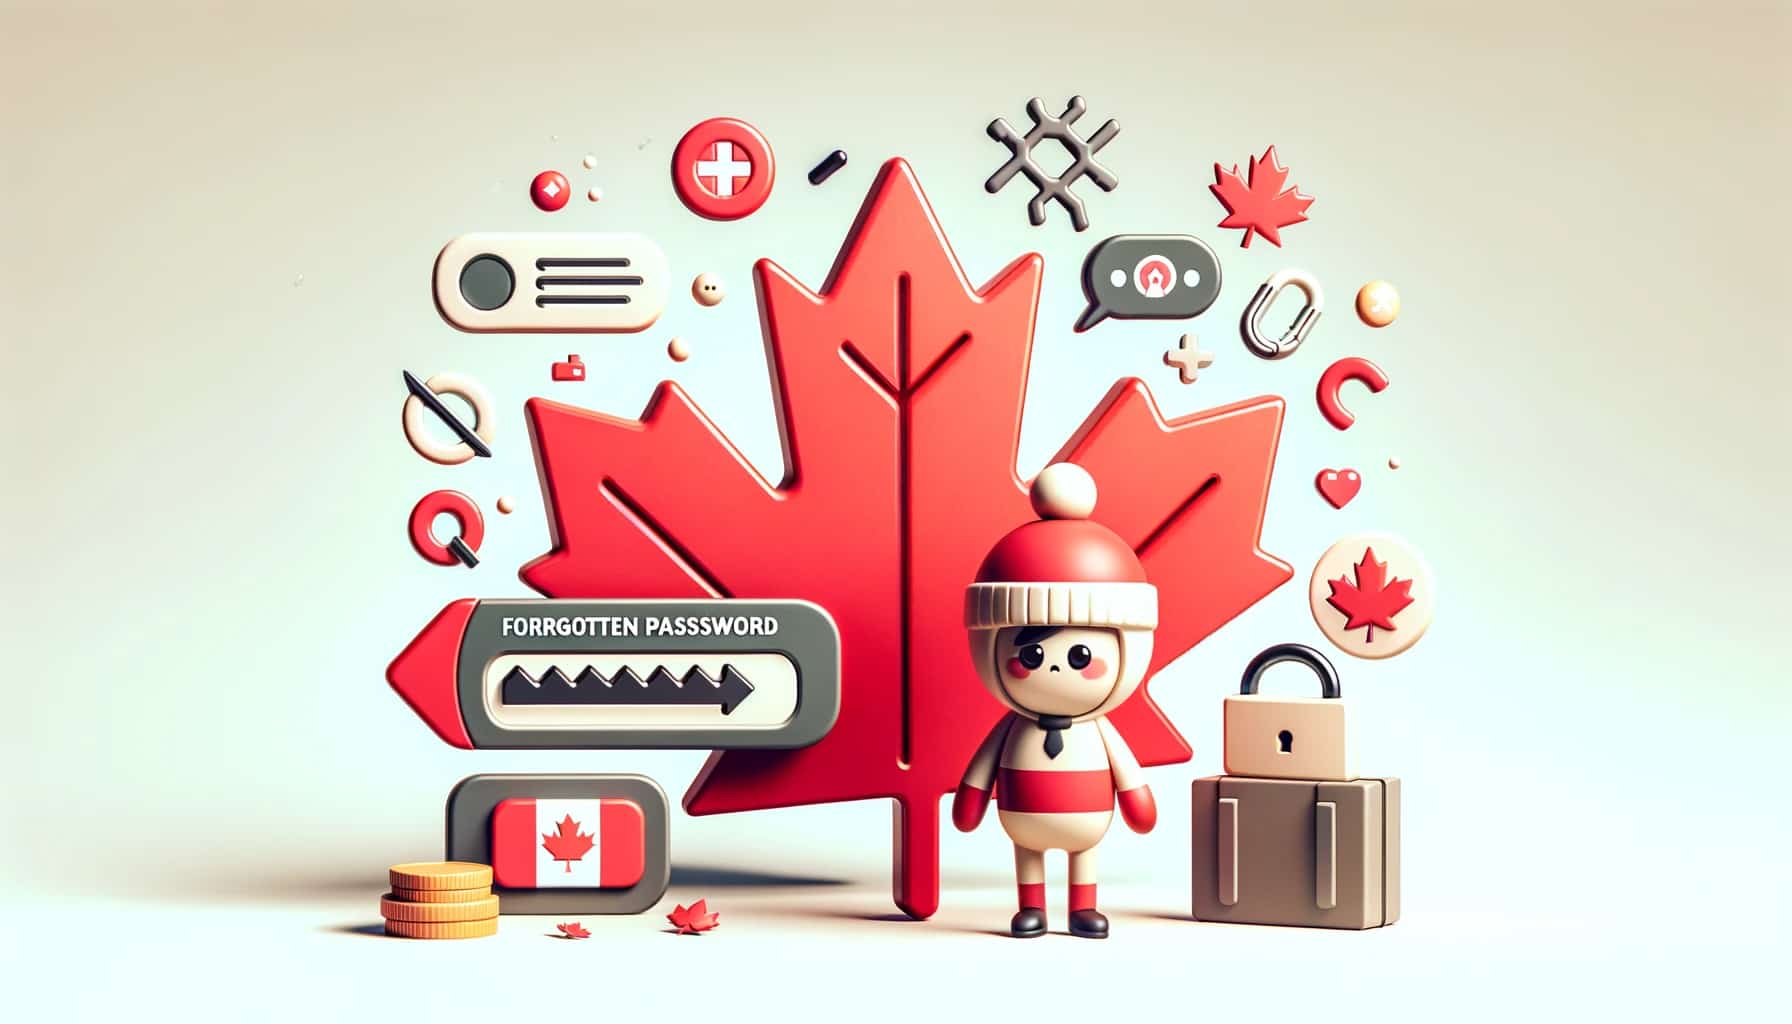 A cartoon character surrounded by Canadian symbols, such as the maple leaf, hockey sticks, and a Mountie